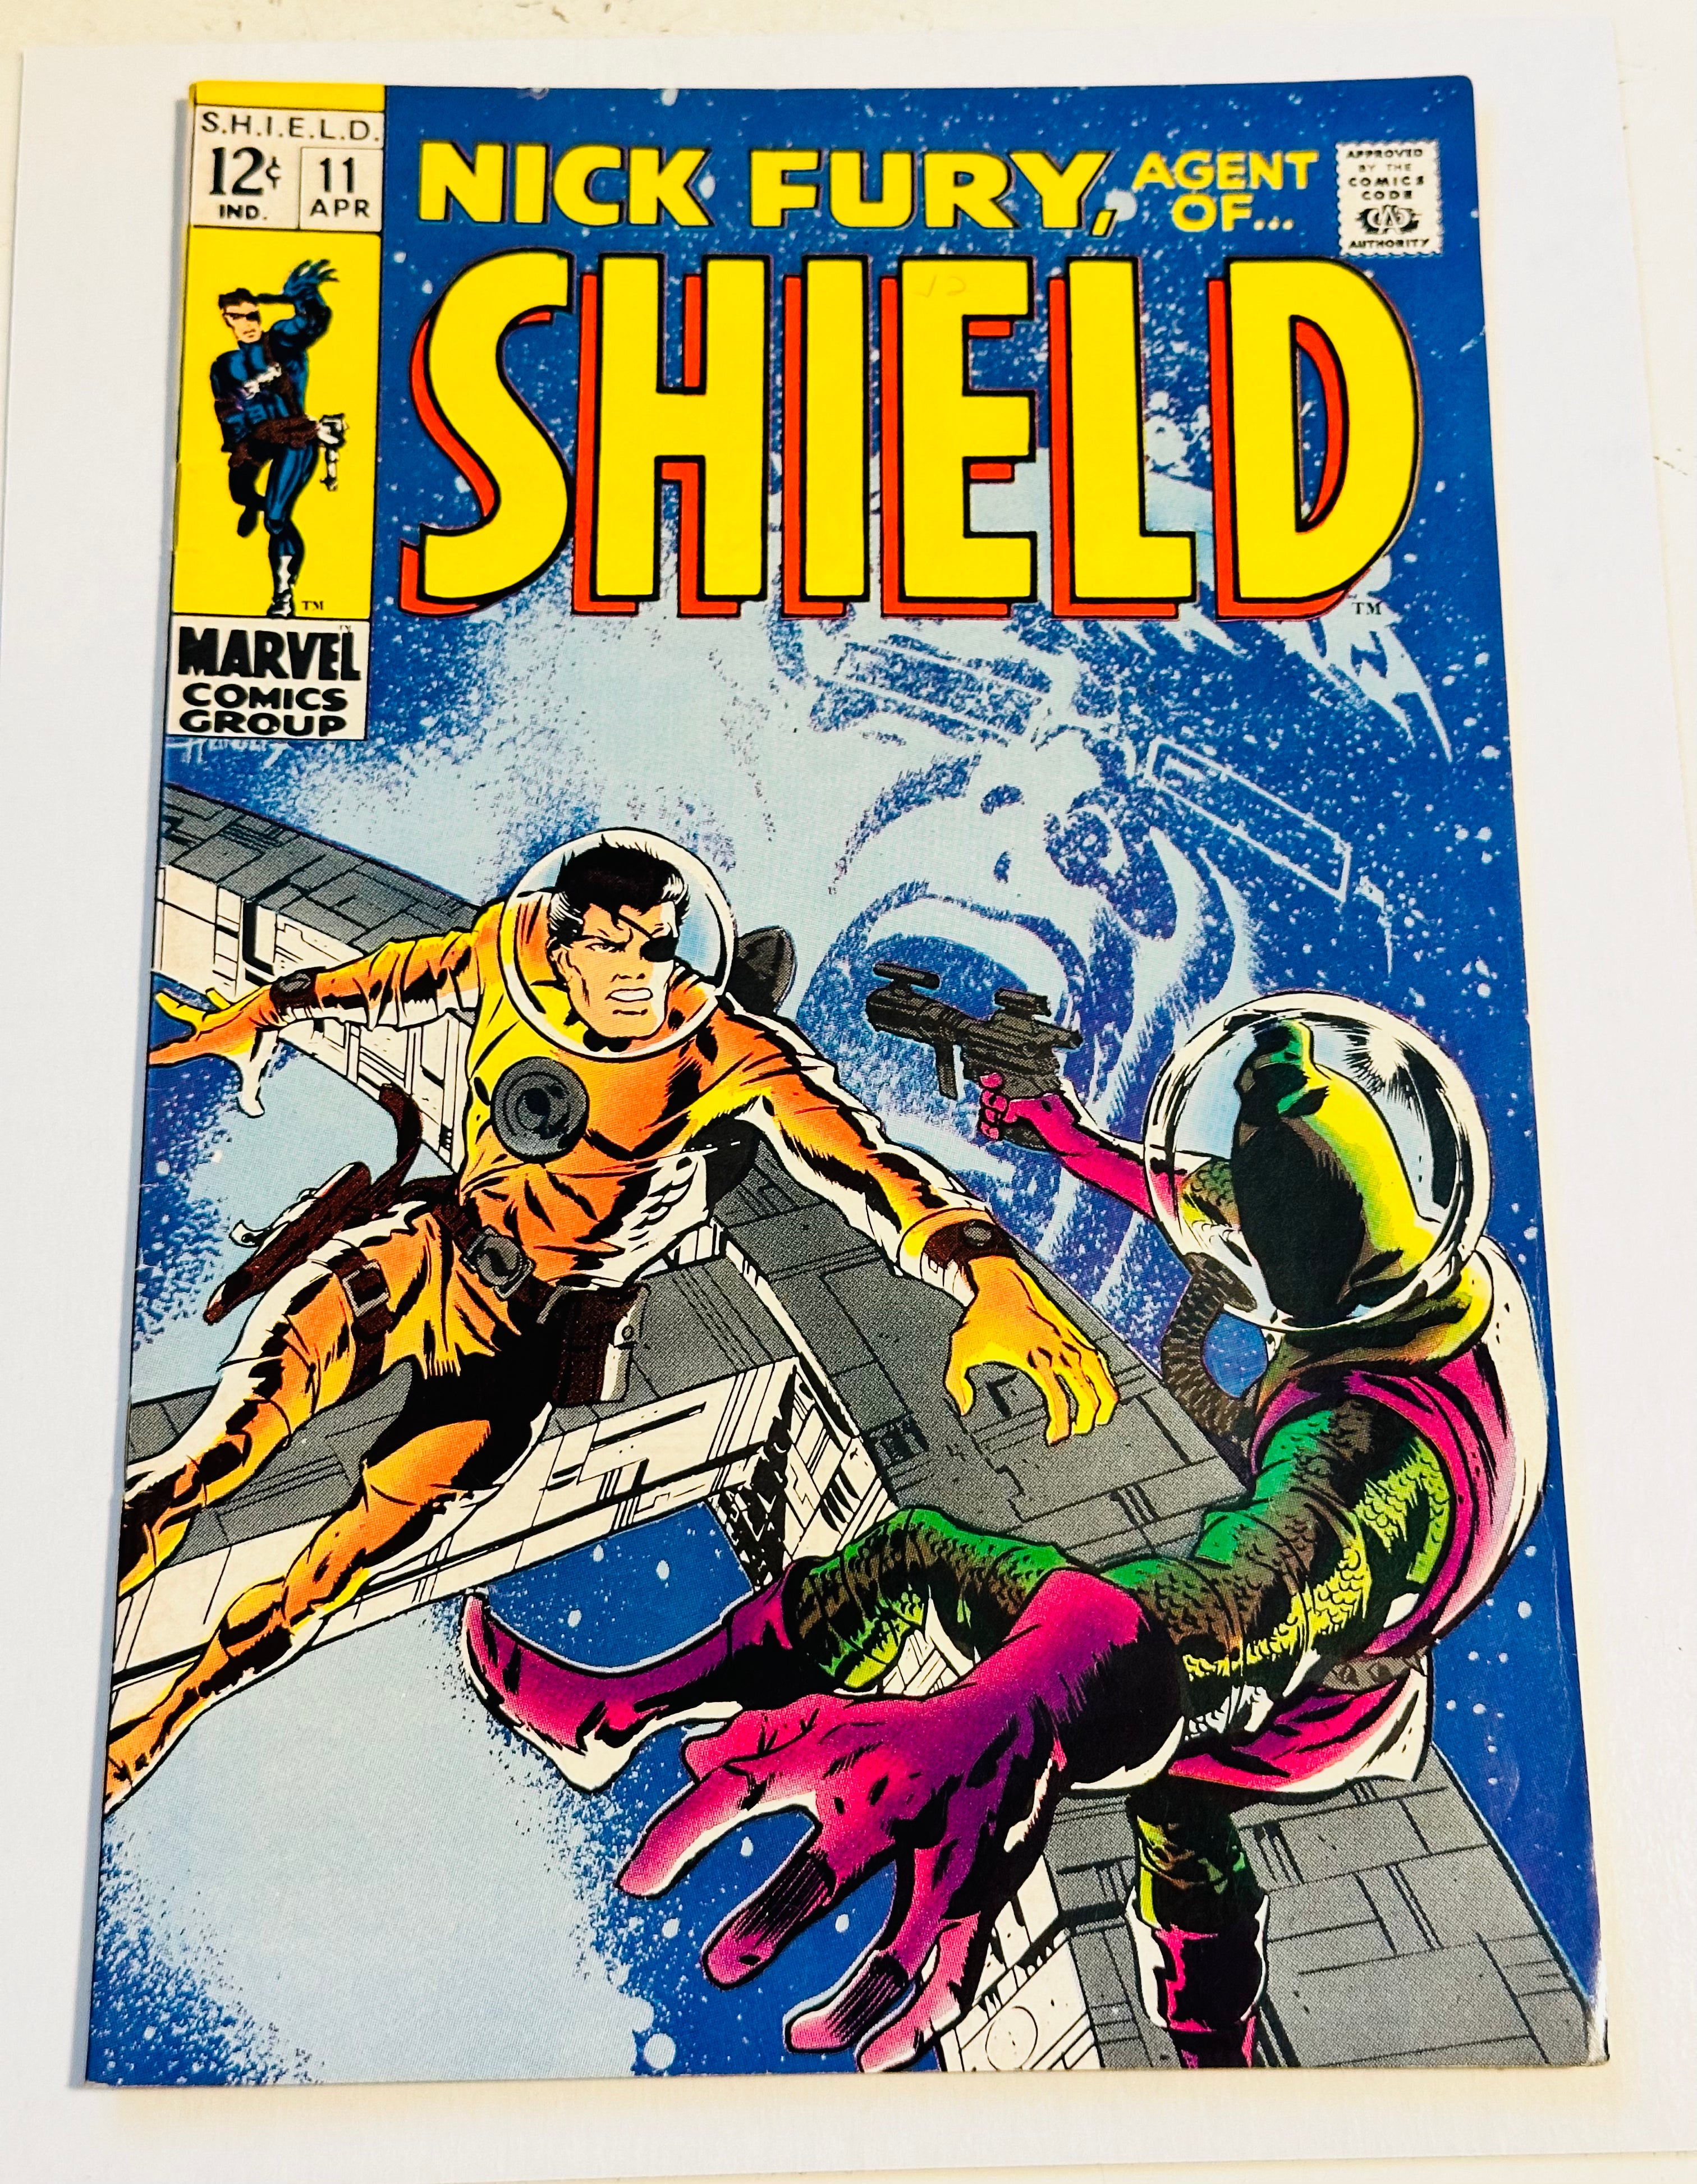 Nick Fury Agent of Shield #11 high grade condition comic book 1969